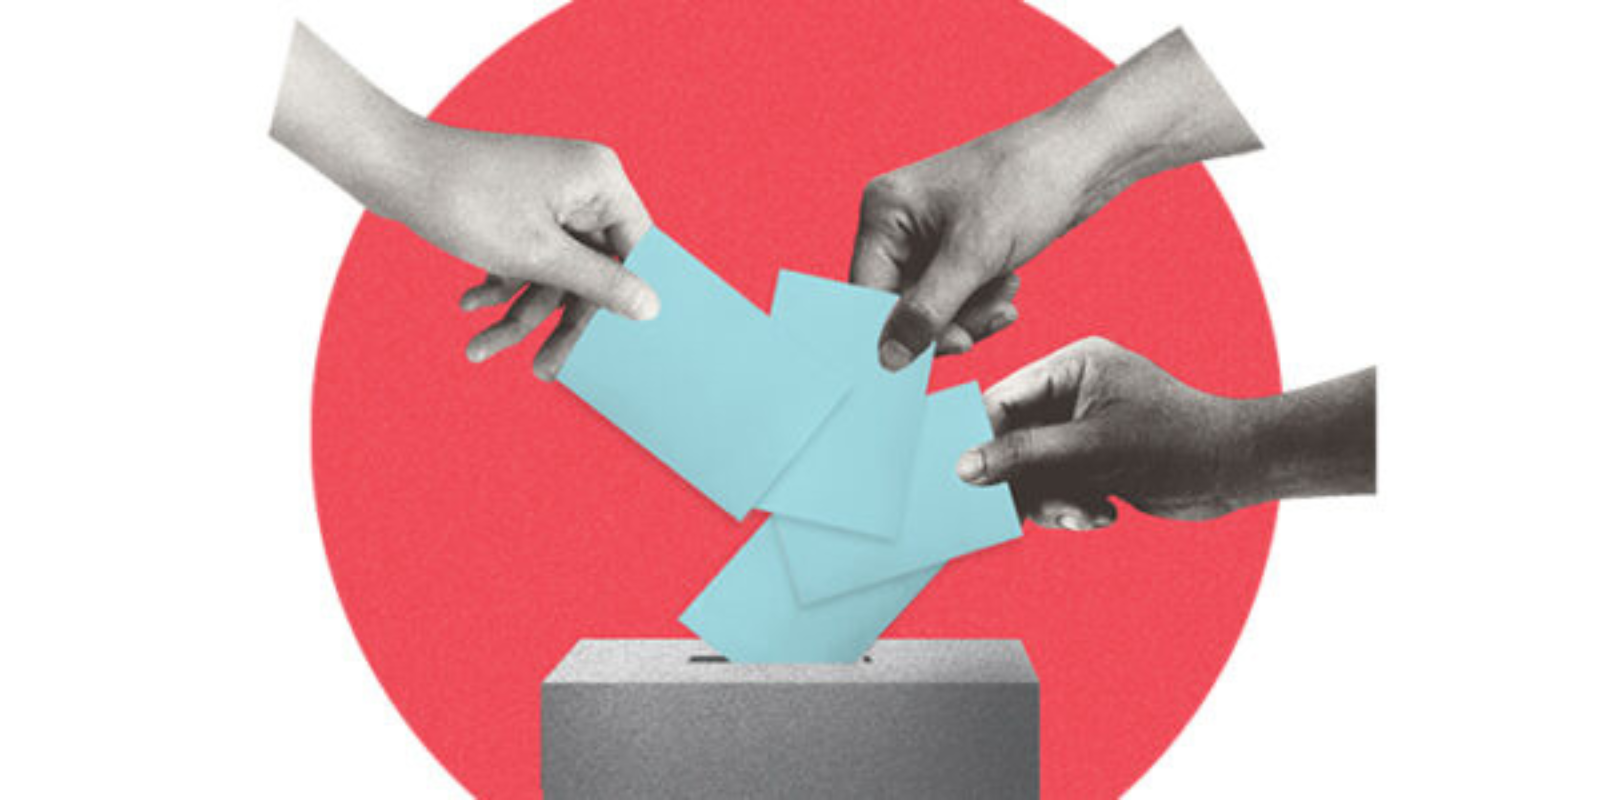 graphic with hands dropping ballots into a box